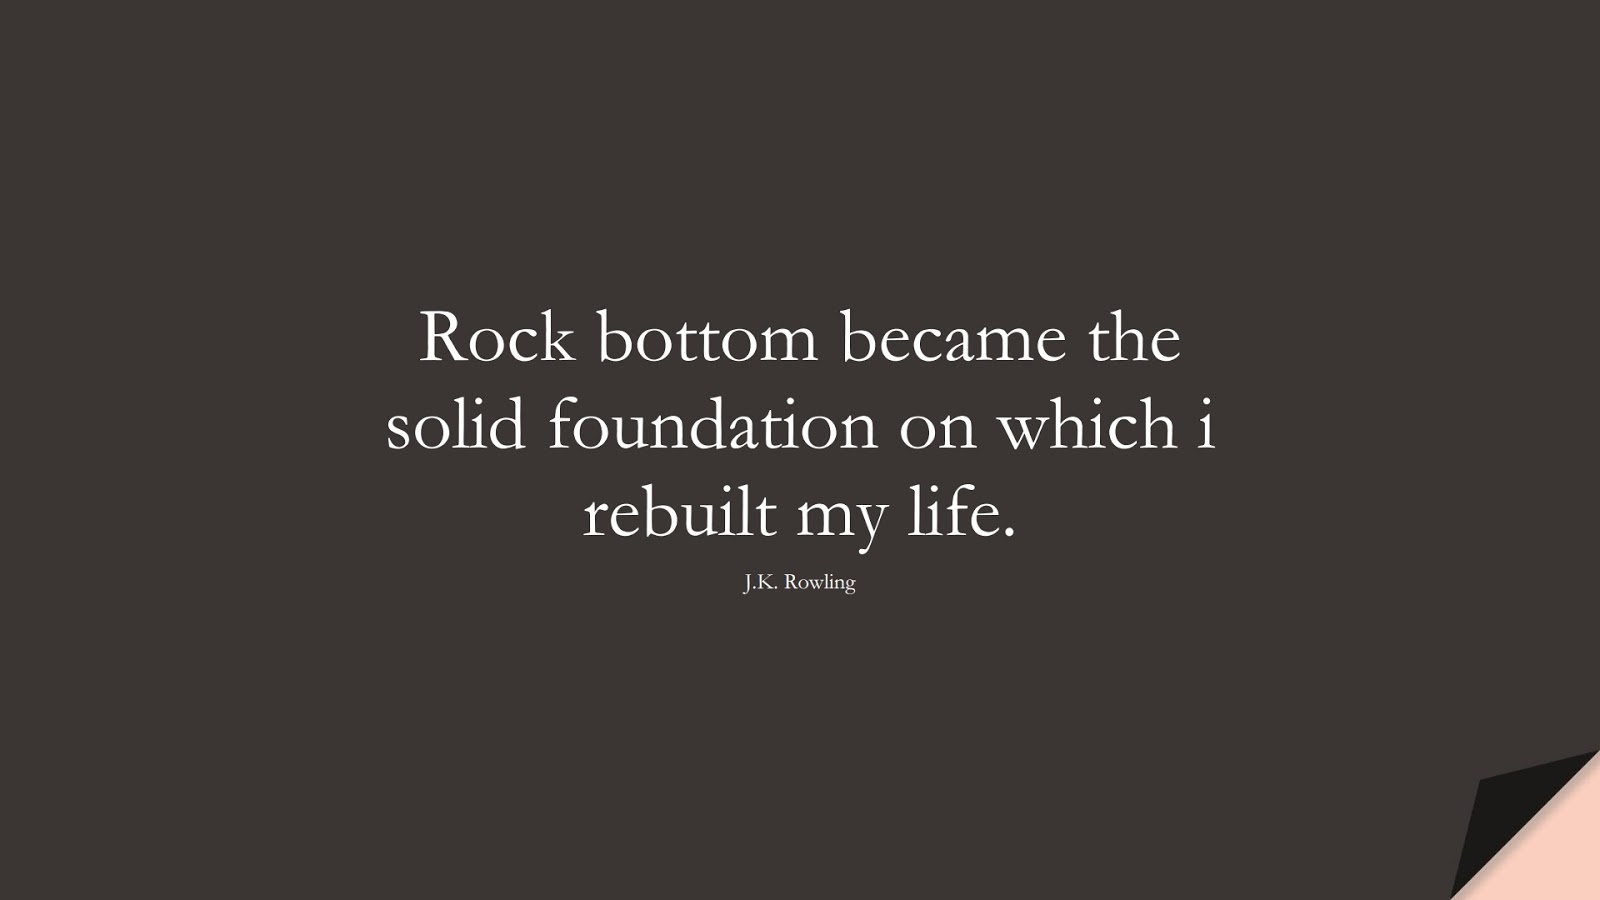 Rock bottom became the solid foundation on which i rebuilt my life. (J.K. Rowling);  #HopeQuotes